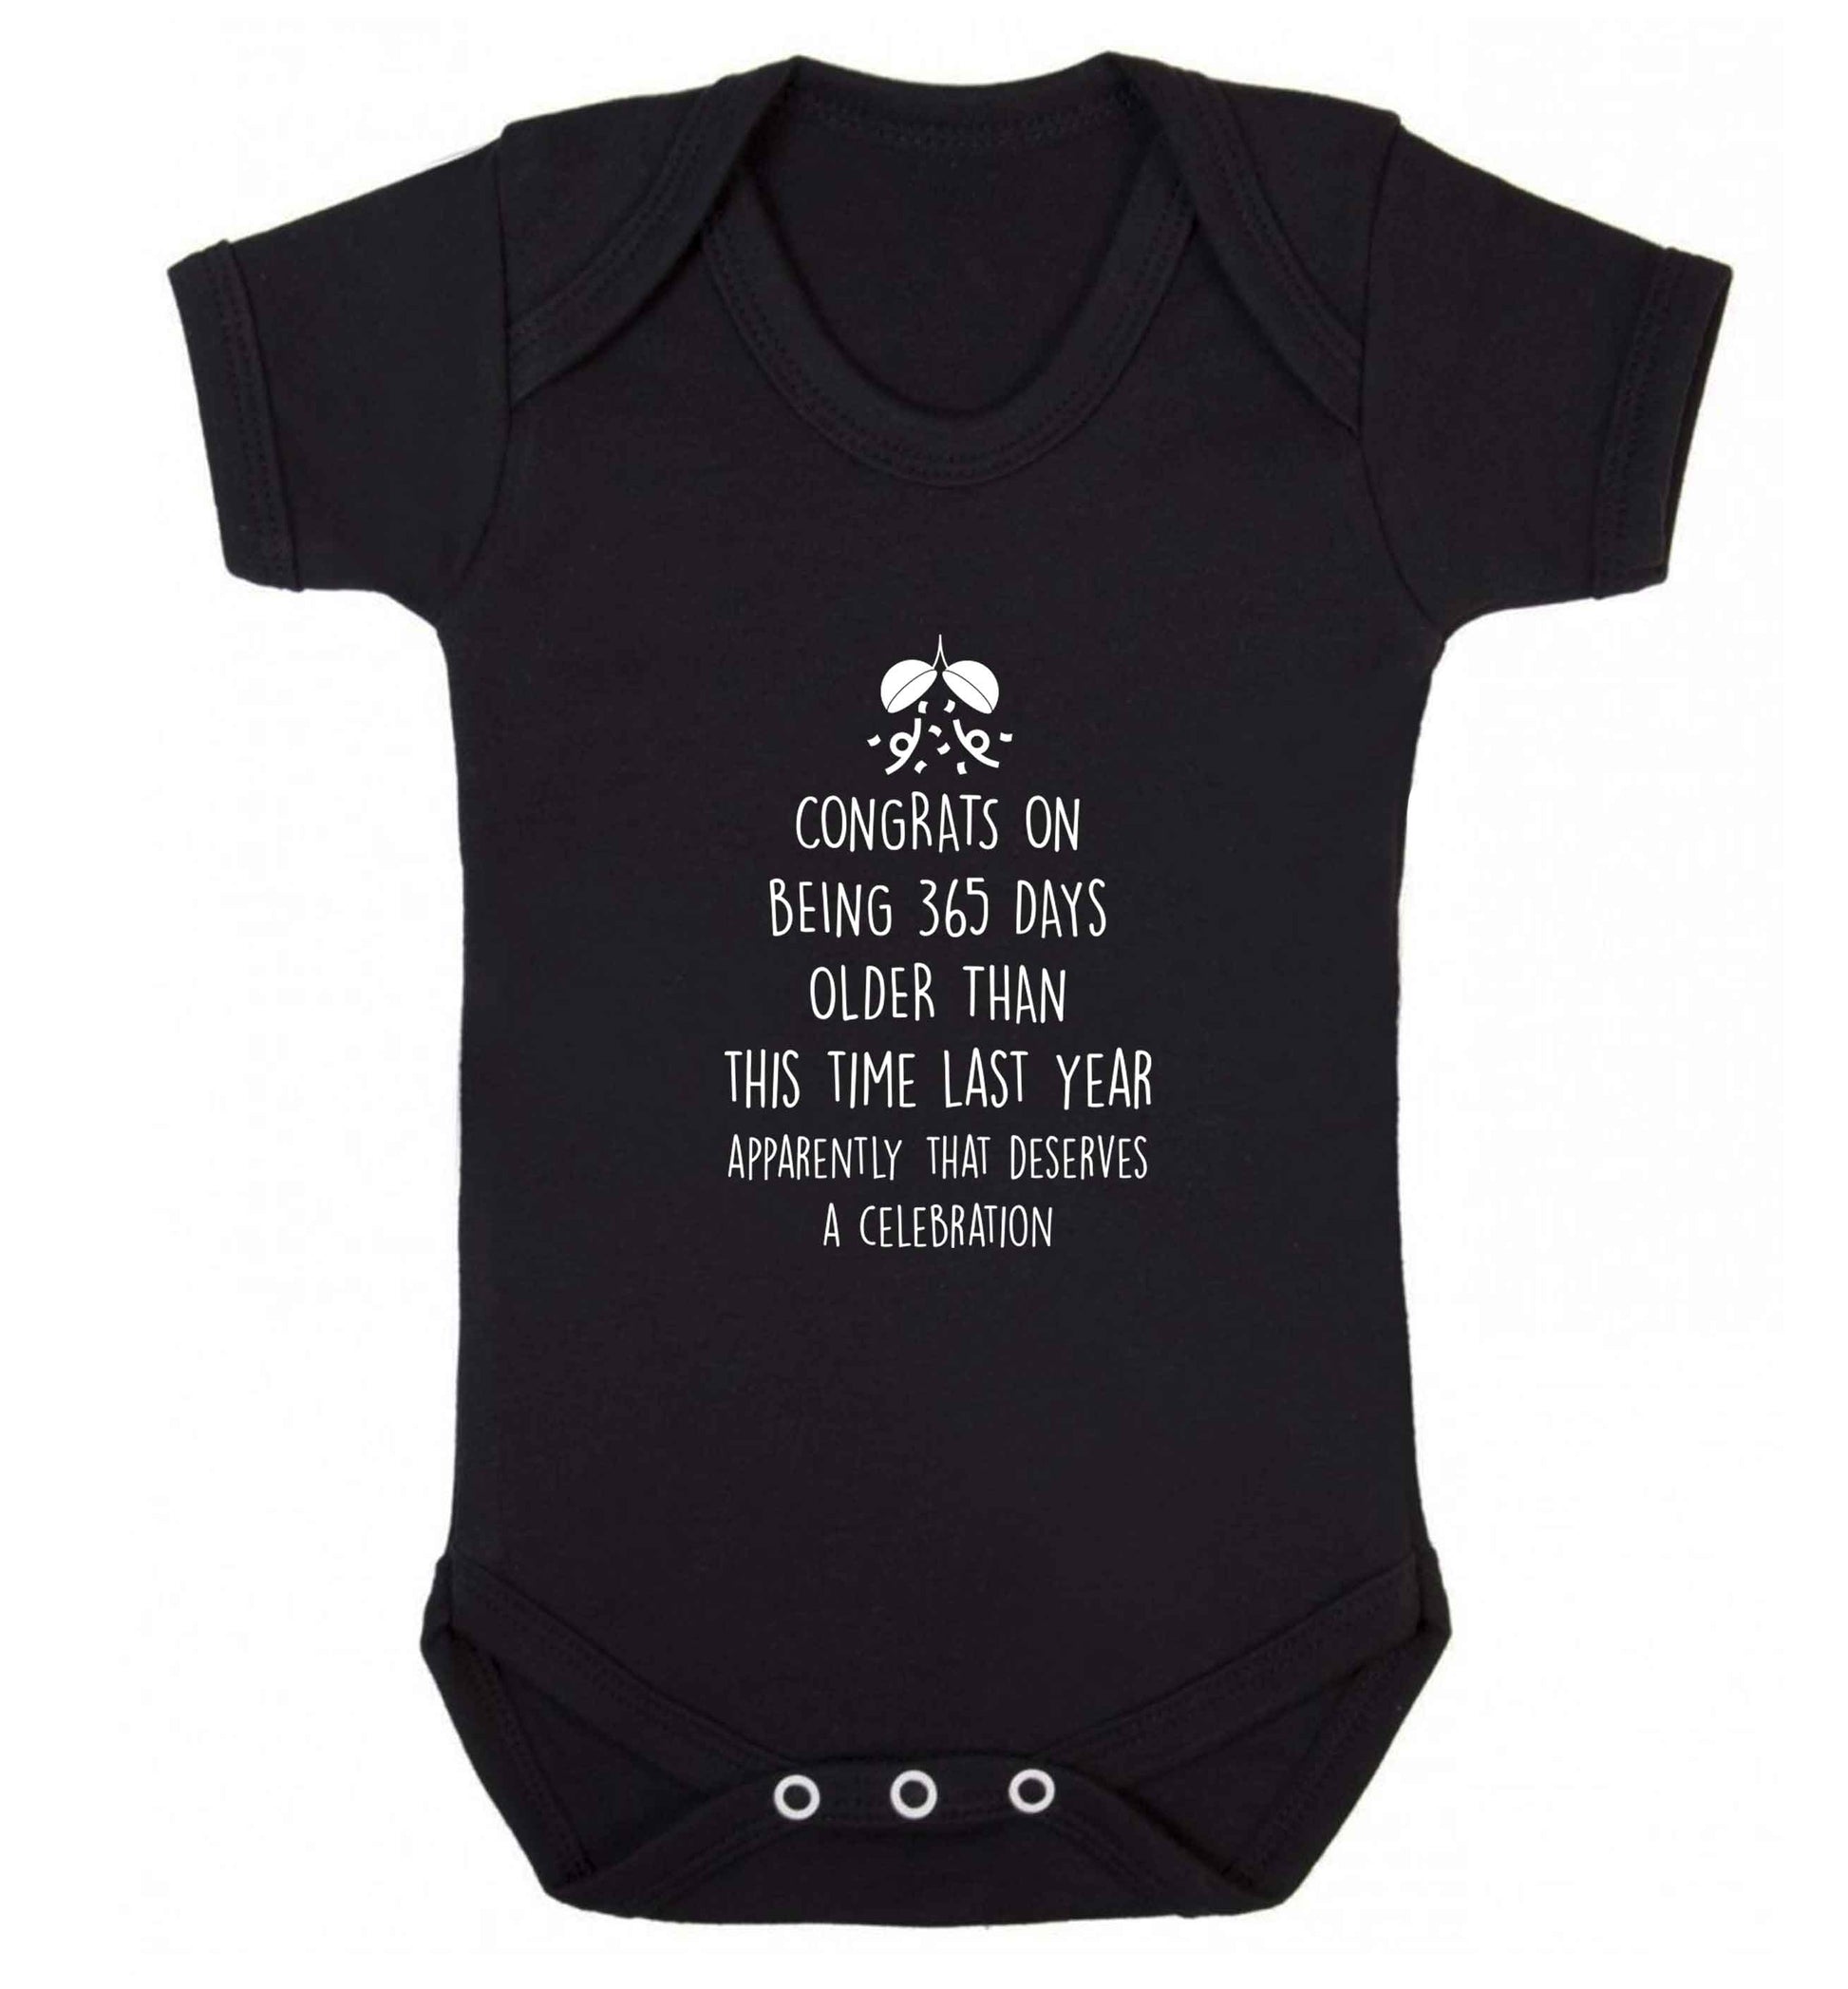 Congrats on being 365 days older than you were this time last year apparently that deserves a celebration baby vest black 18-24 months